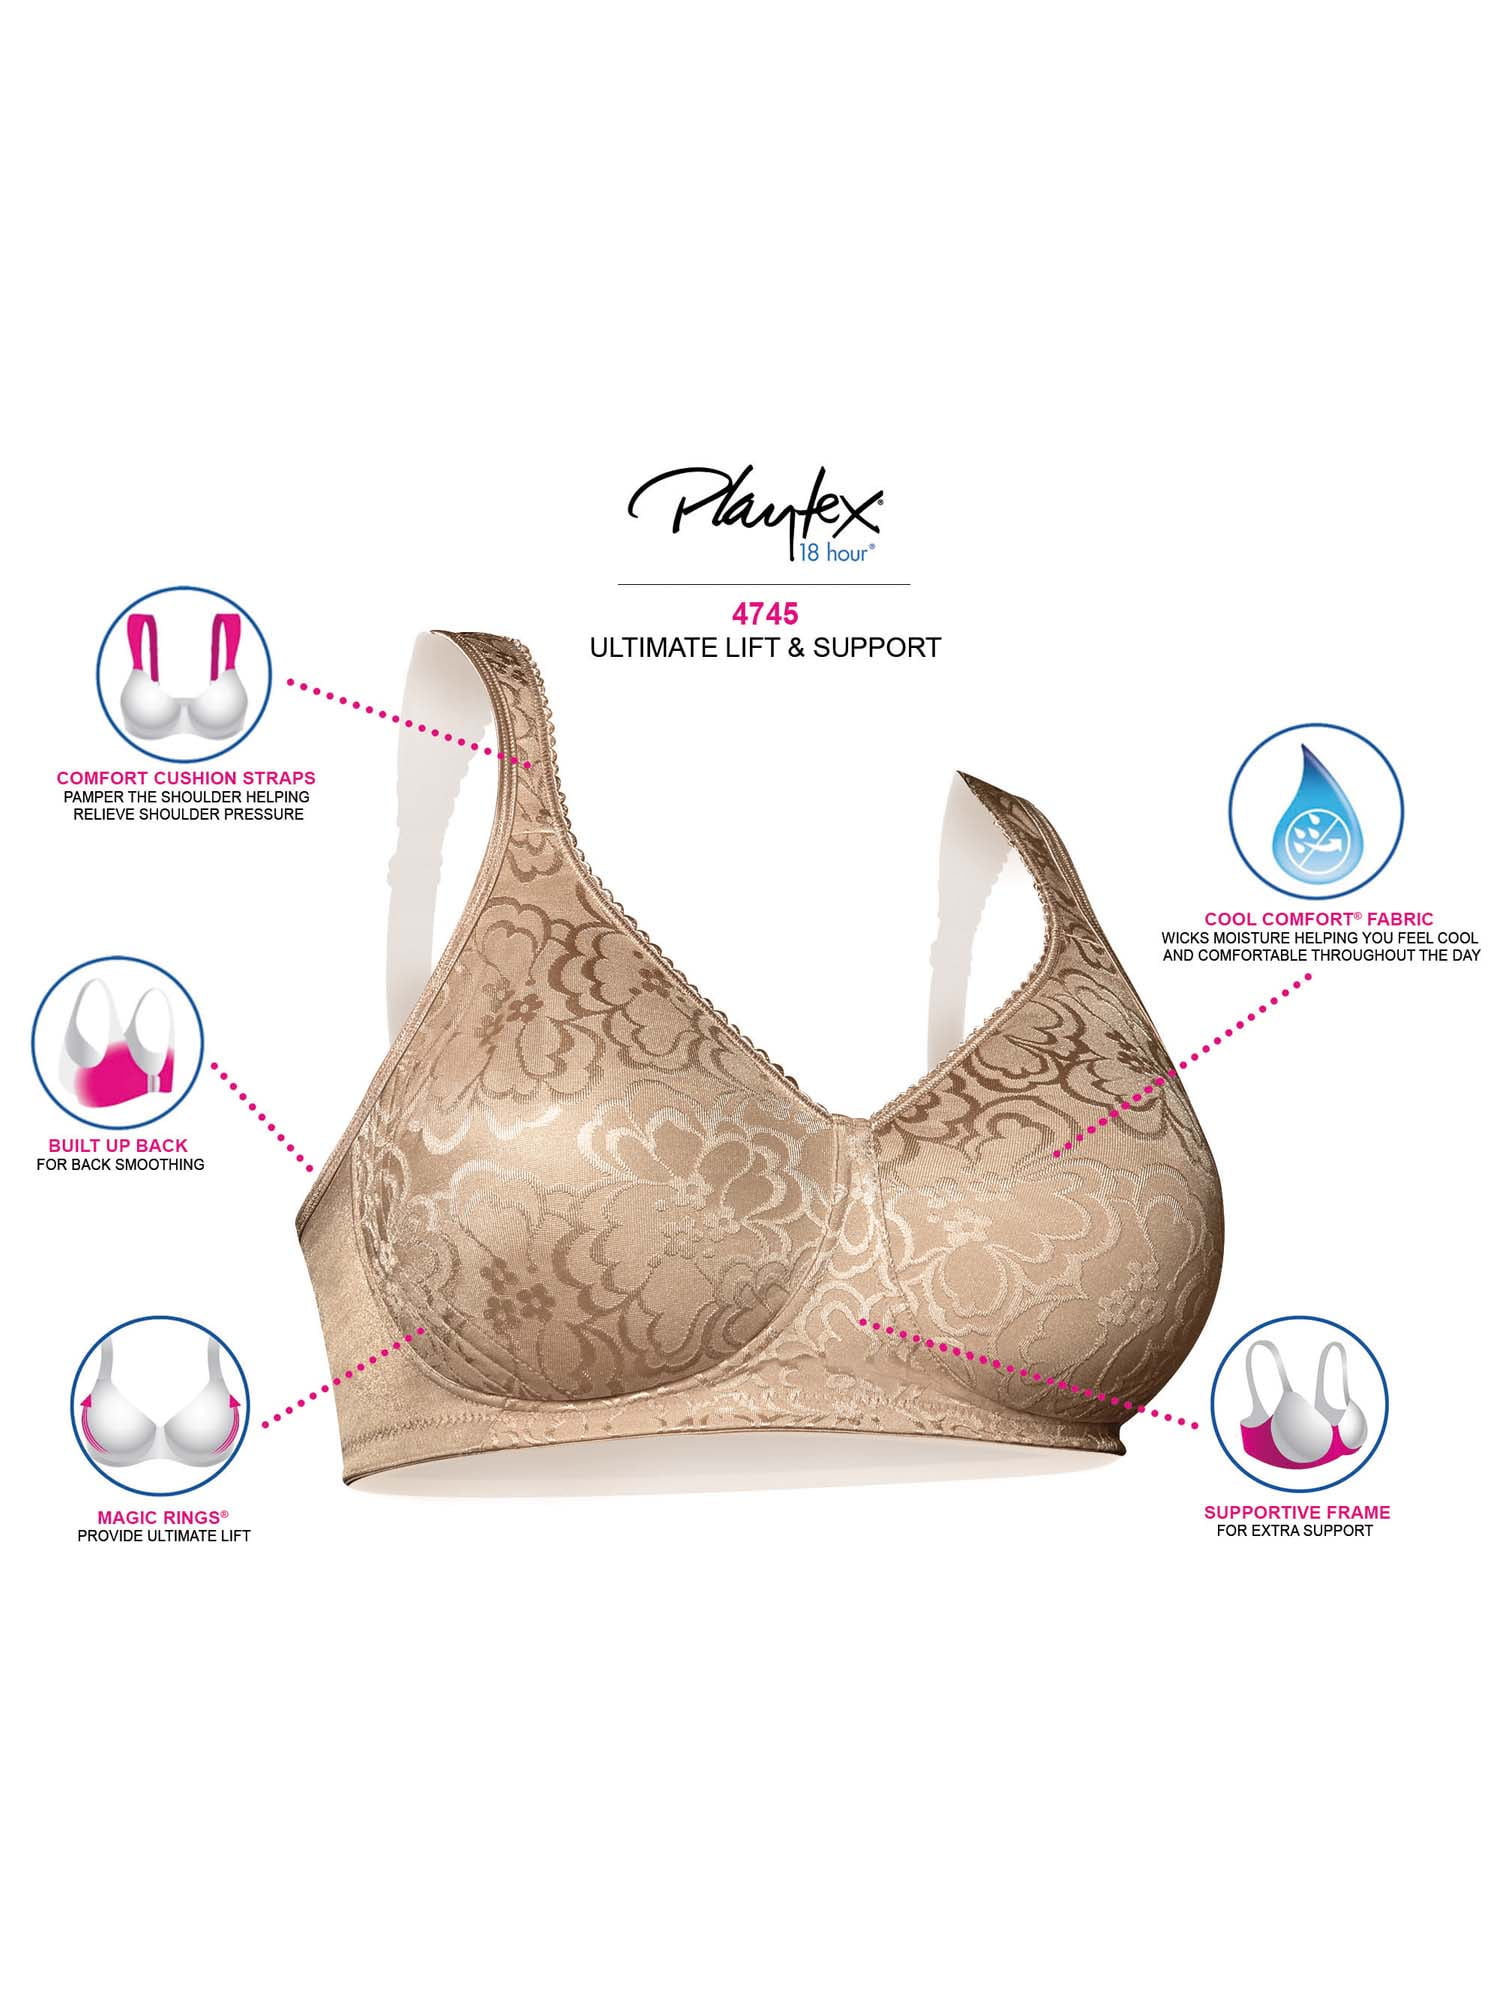 Playtex 18 Hour Ultimate Lift and Support Wirefree Bra 4745 at Avon